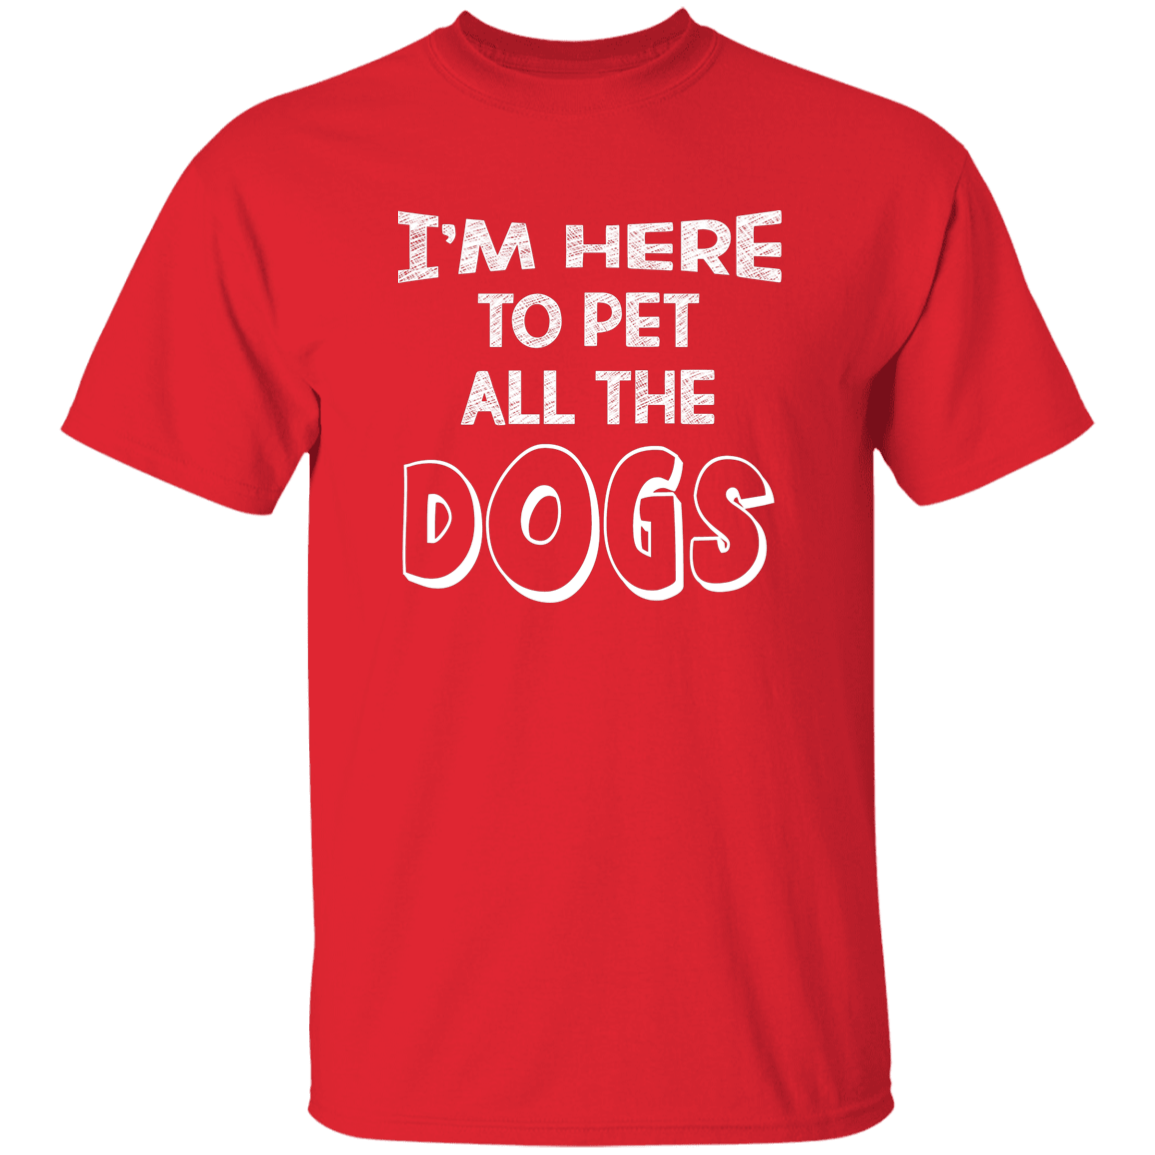 I'm Here To Pet All The Dogs - T Shirt.